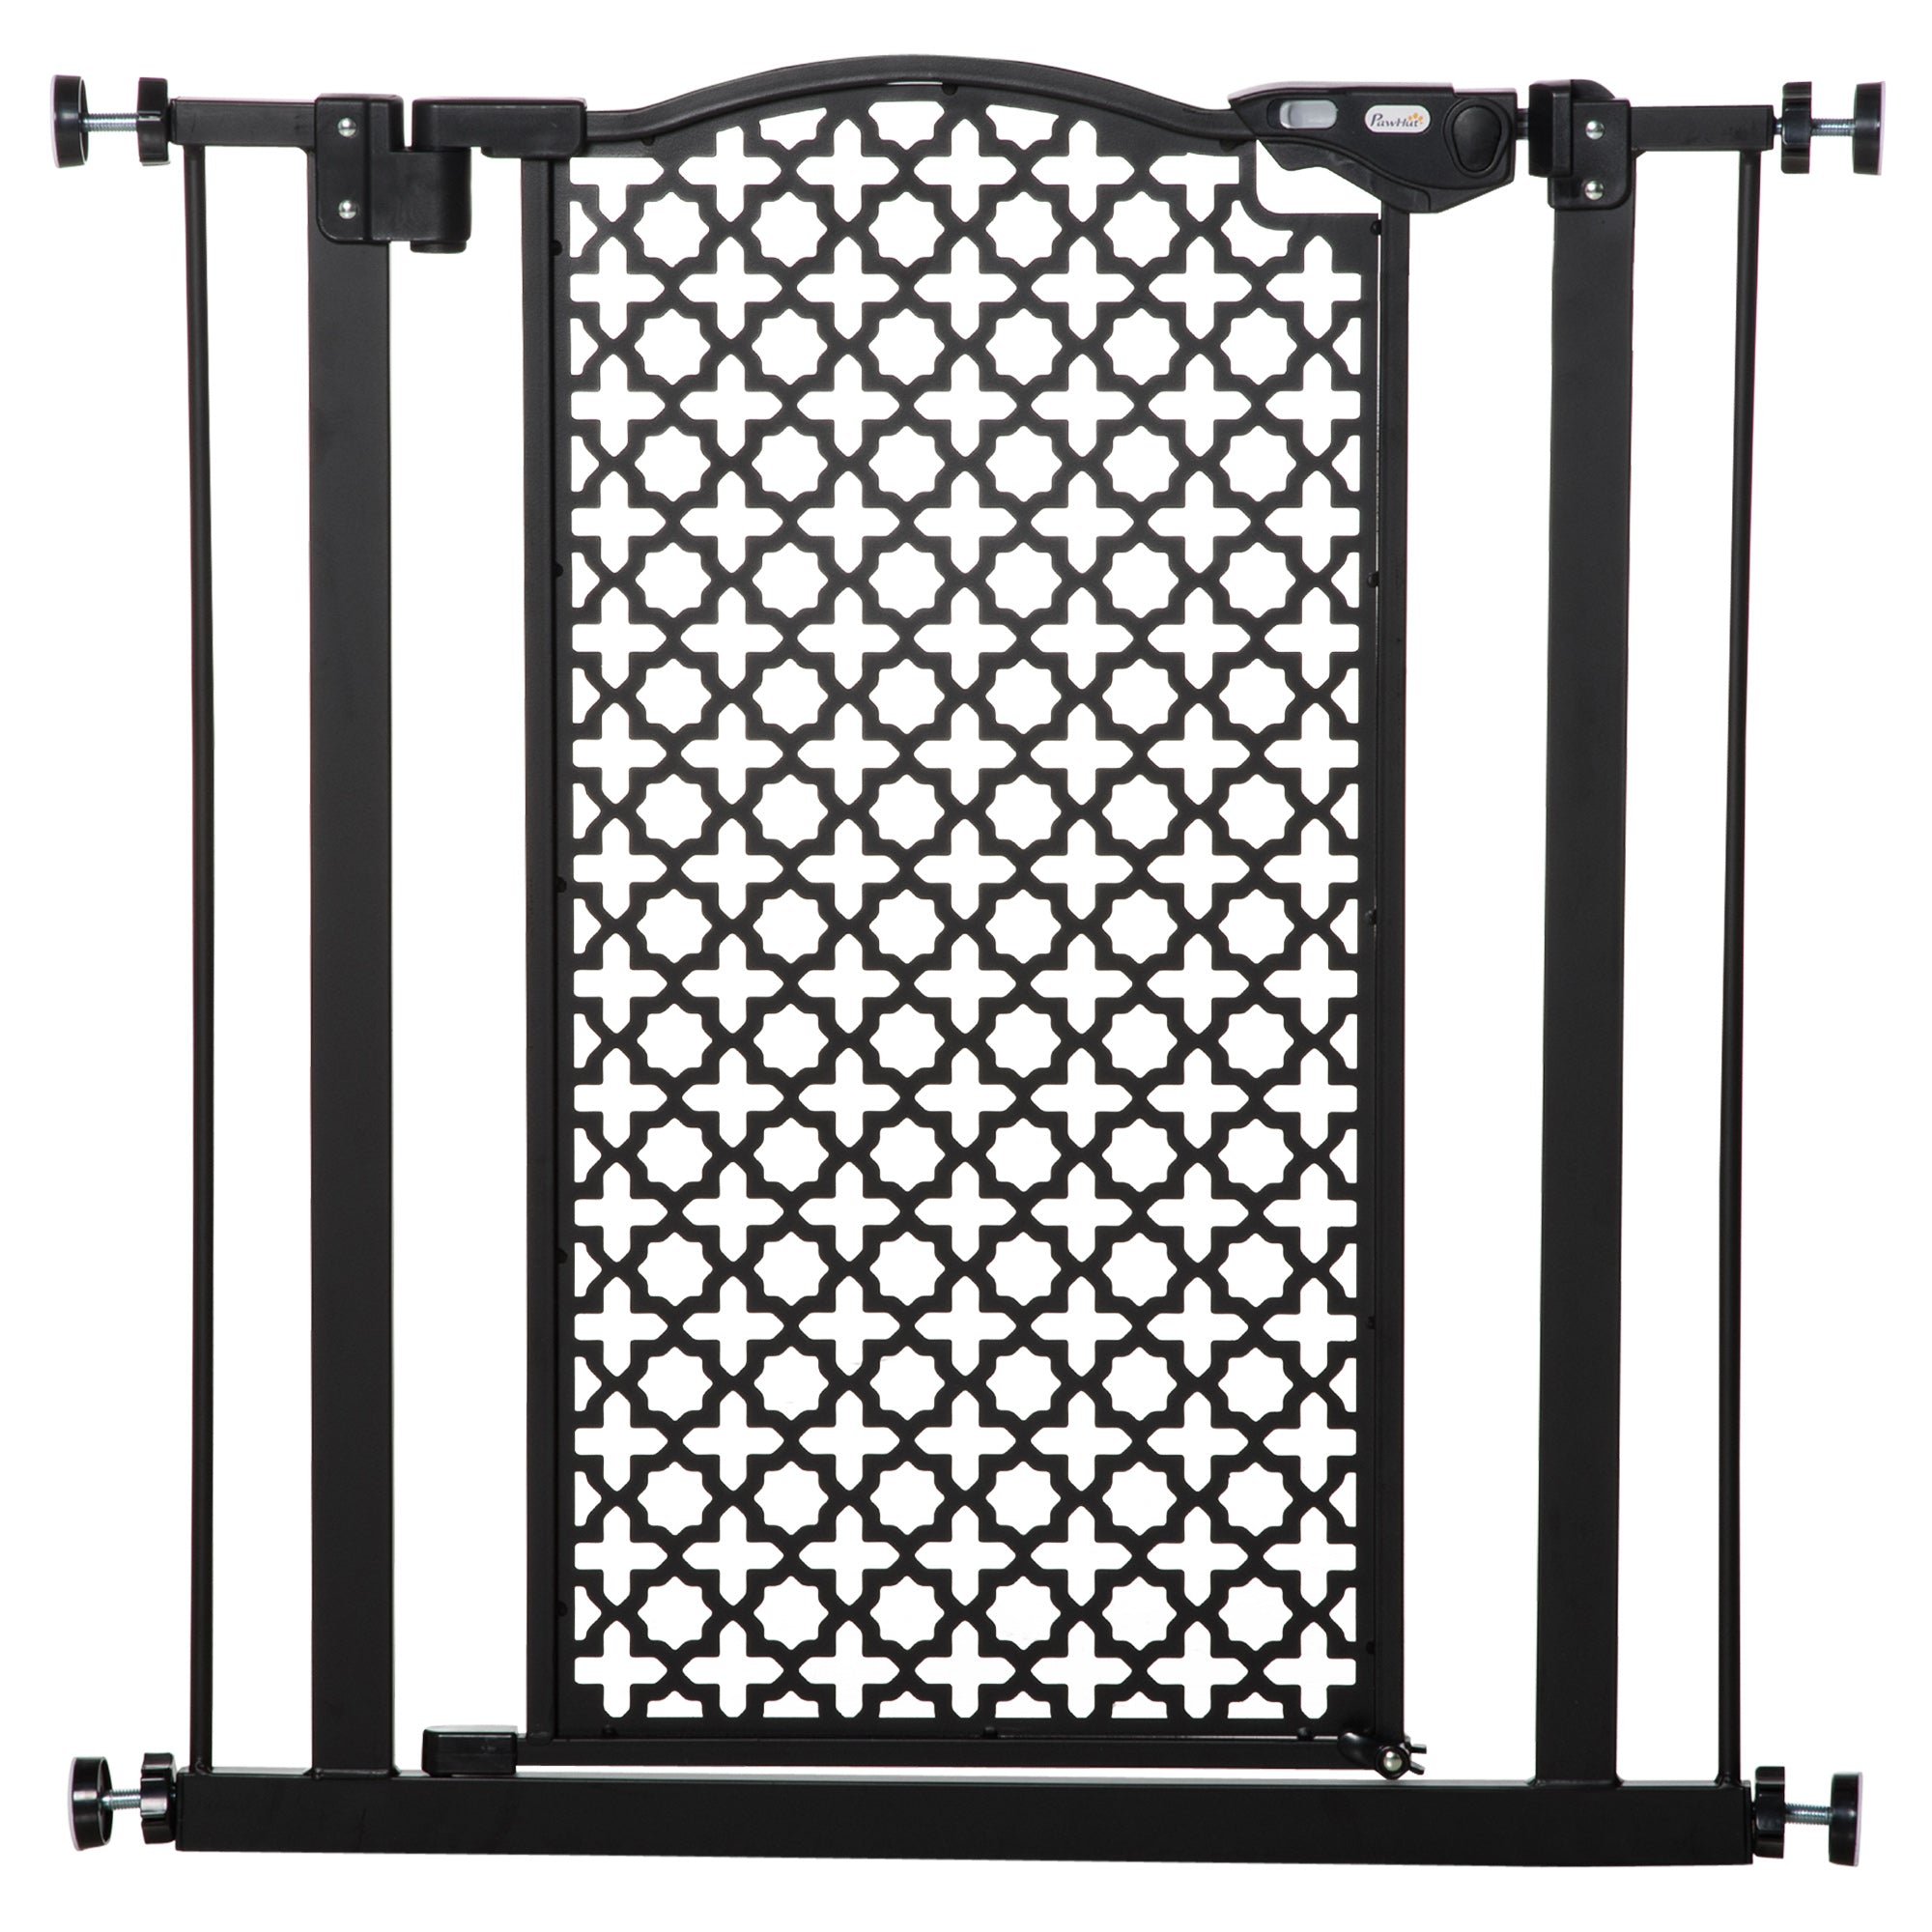 74-80 cm Pet Safety Gate Barrier Stair Pressure Fit with Auto Close and Double Locking for Doorways, Hallways, Black-0